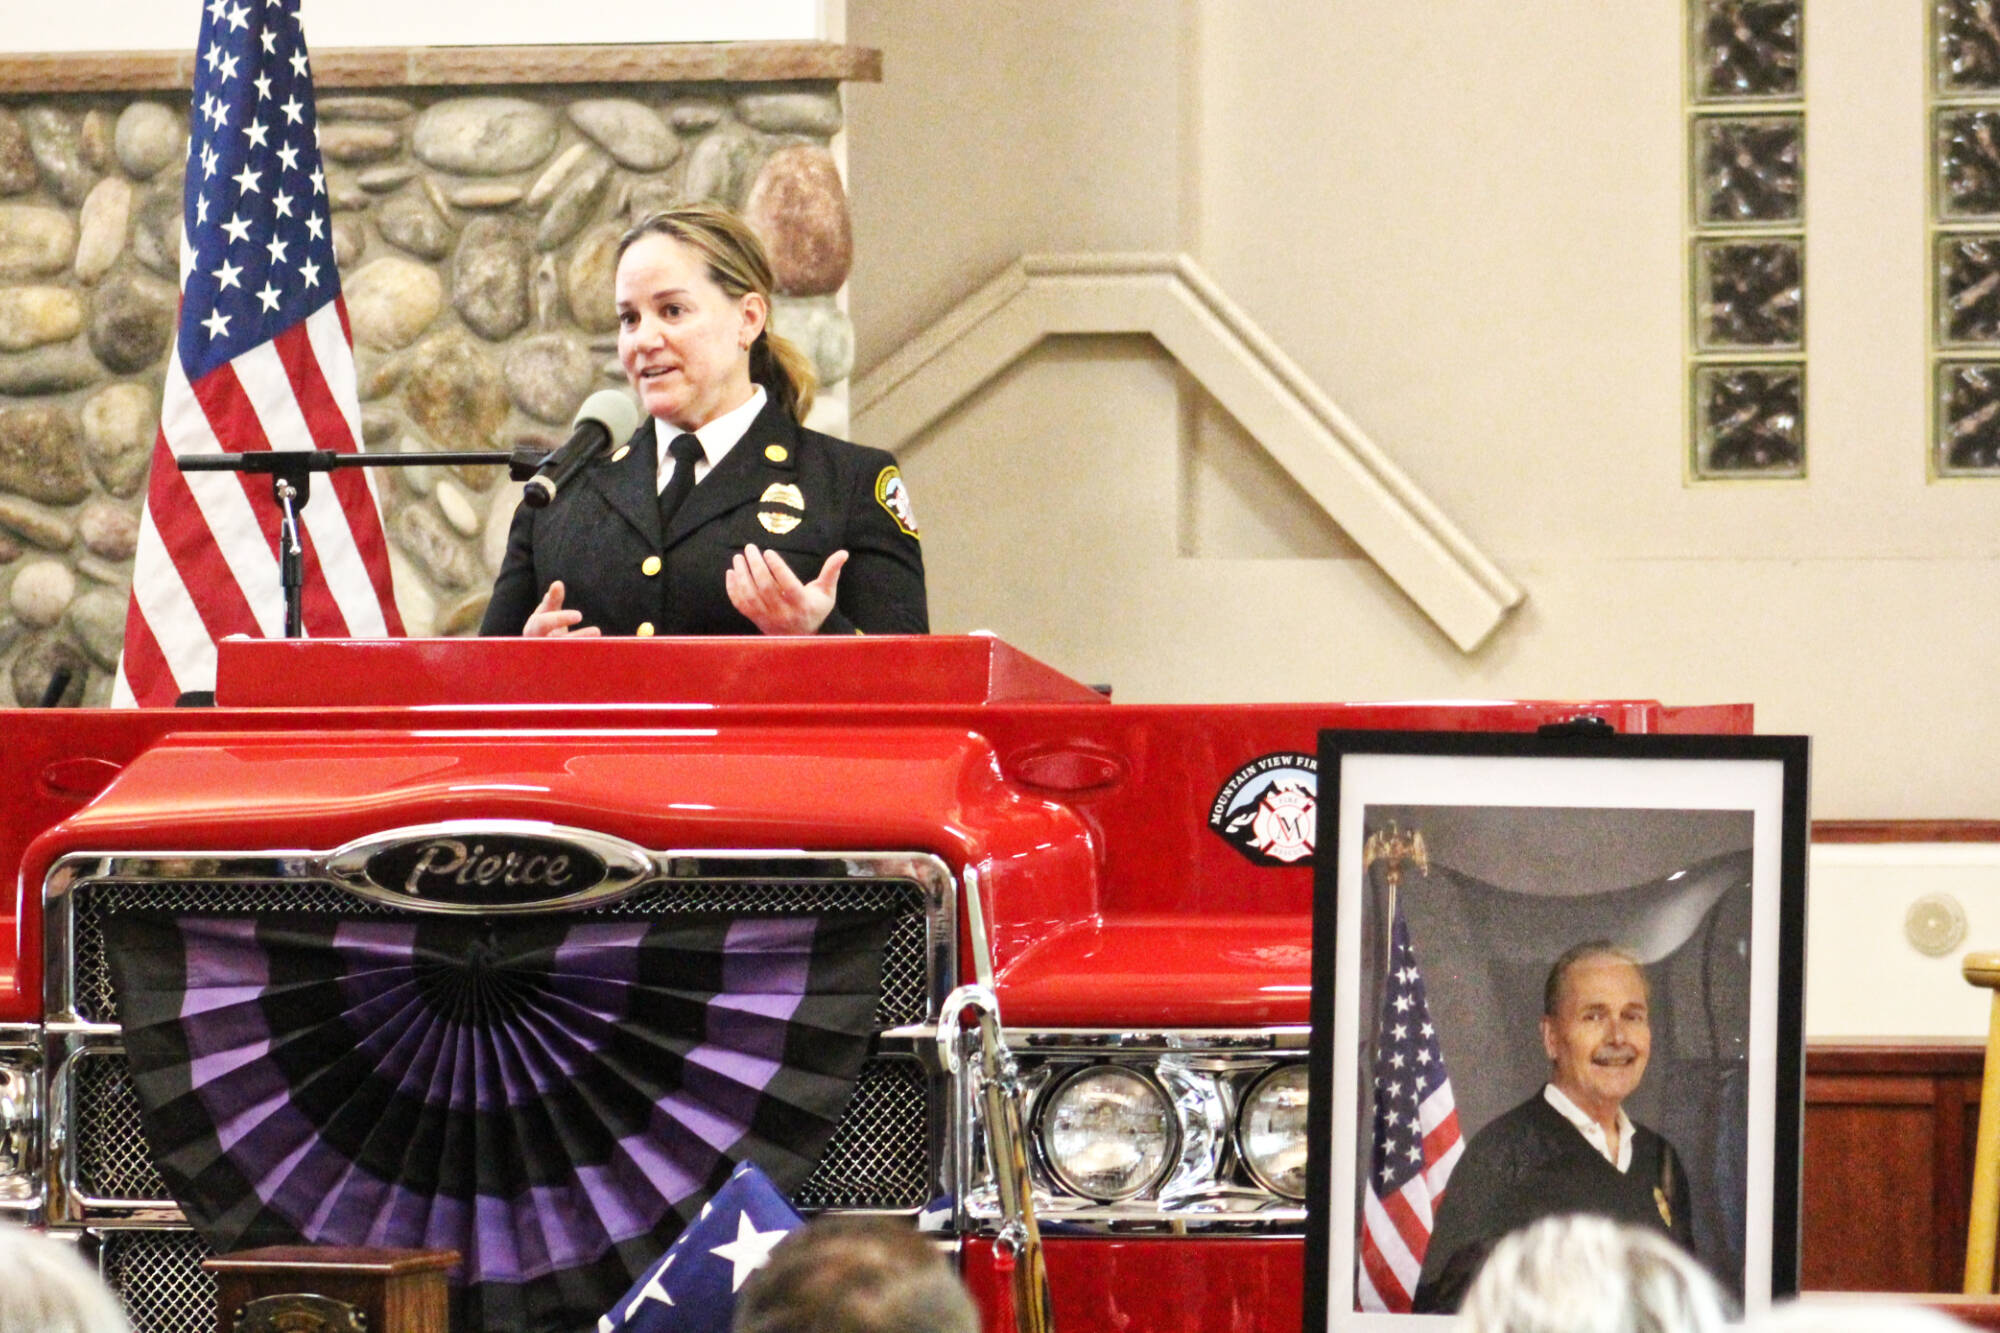 Mountain View Fire and Rescue’s new Fire Chief Dawn Judkins welcomed everyone to former Chief Greg Smith’s Celebration of Life service at the Muckleshoot Pentecostal Church last Monday. The service started out with an honor guard and procession bringing in an urn, flag, and firefighter helmet. Photos by Ray Miller-Still